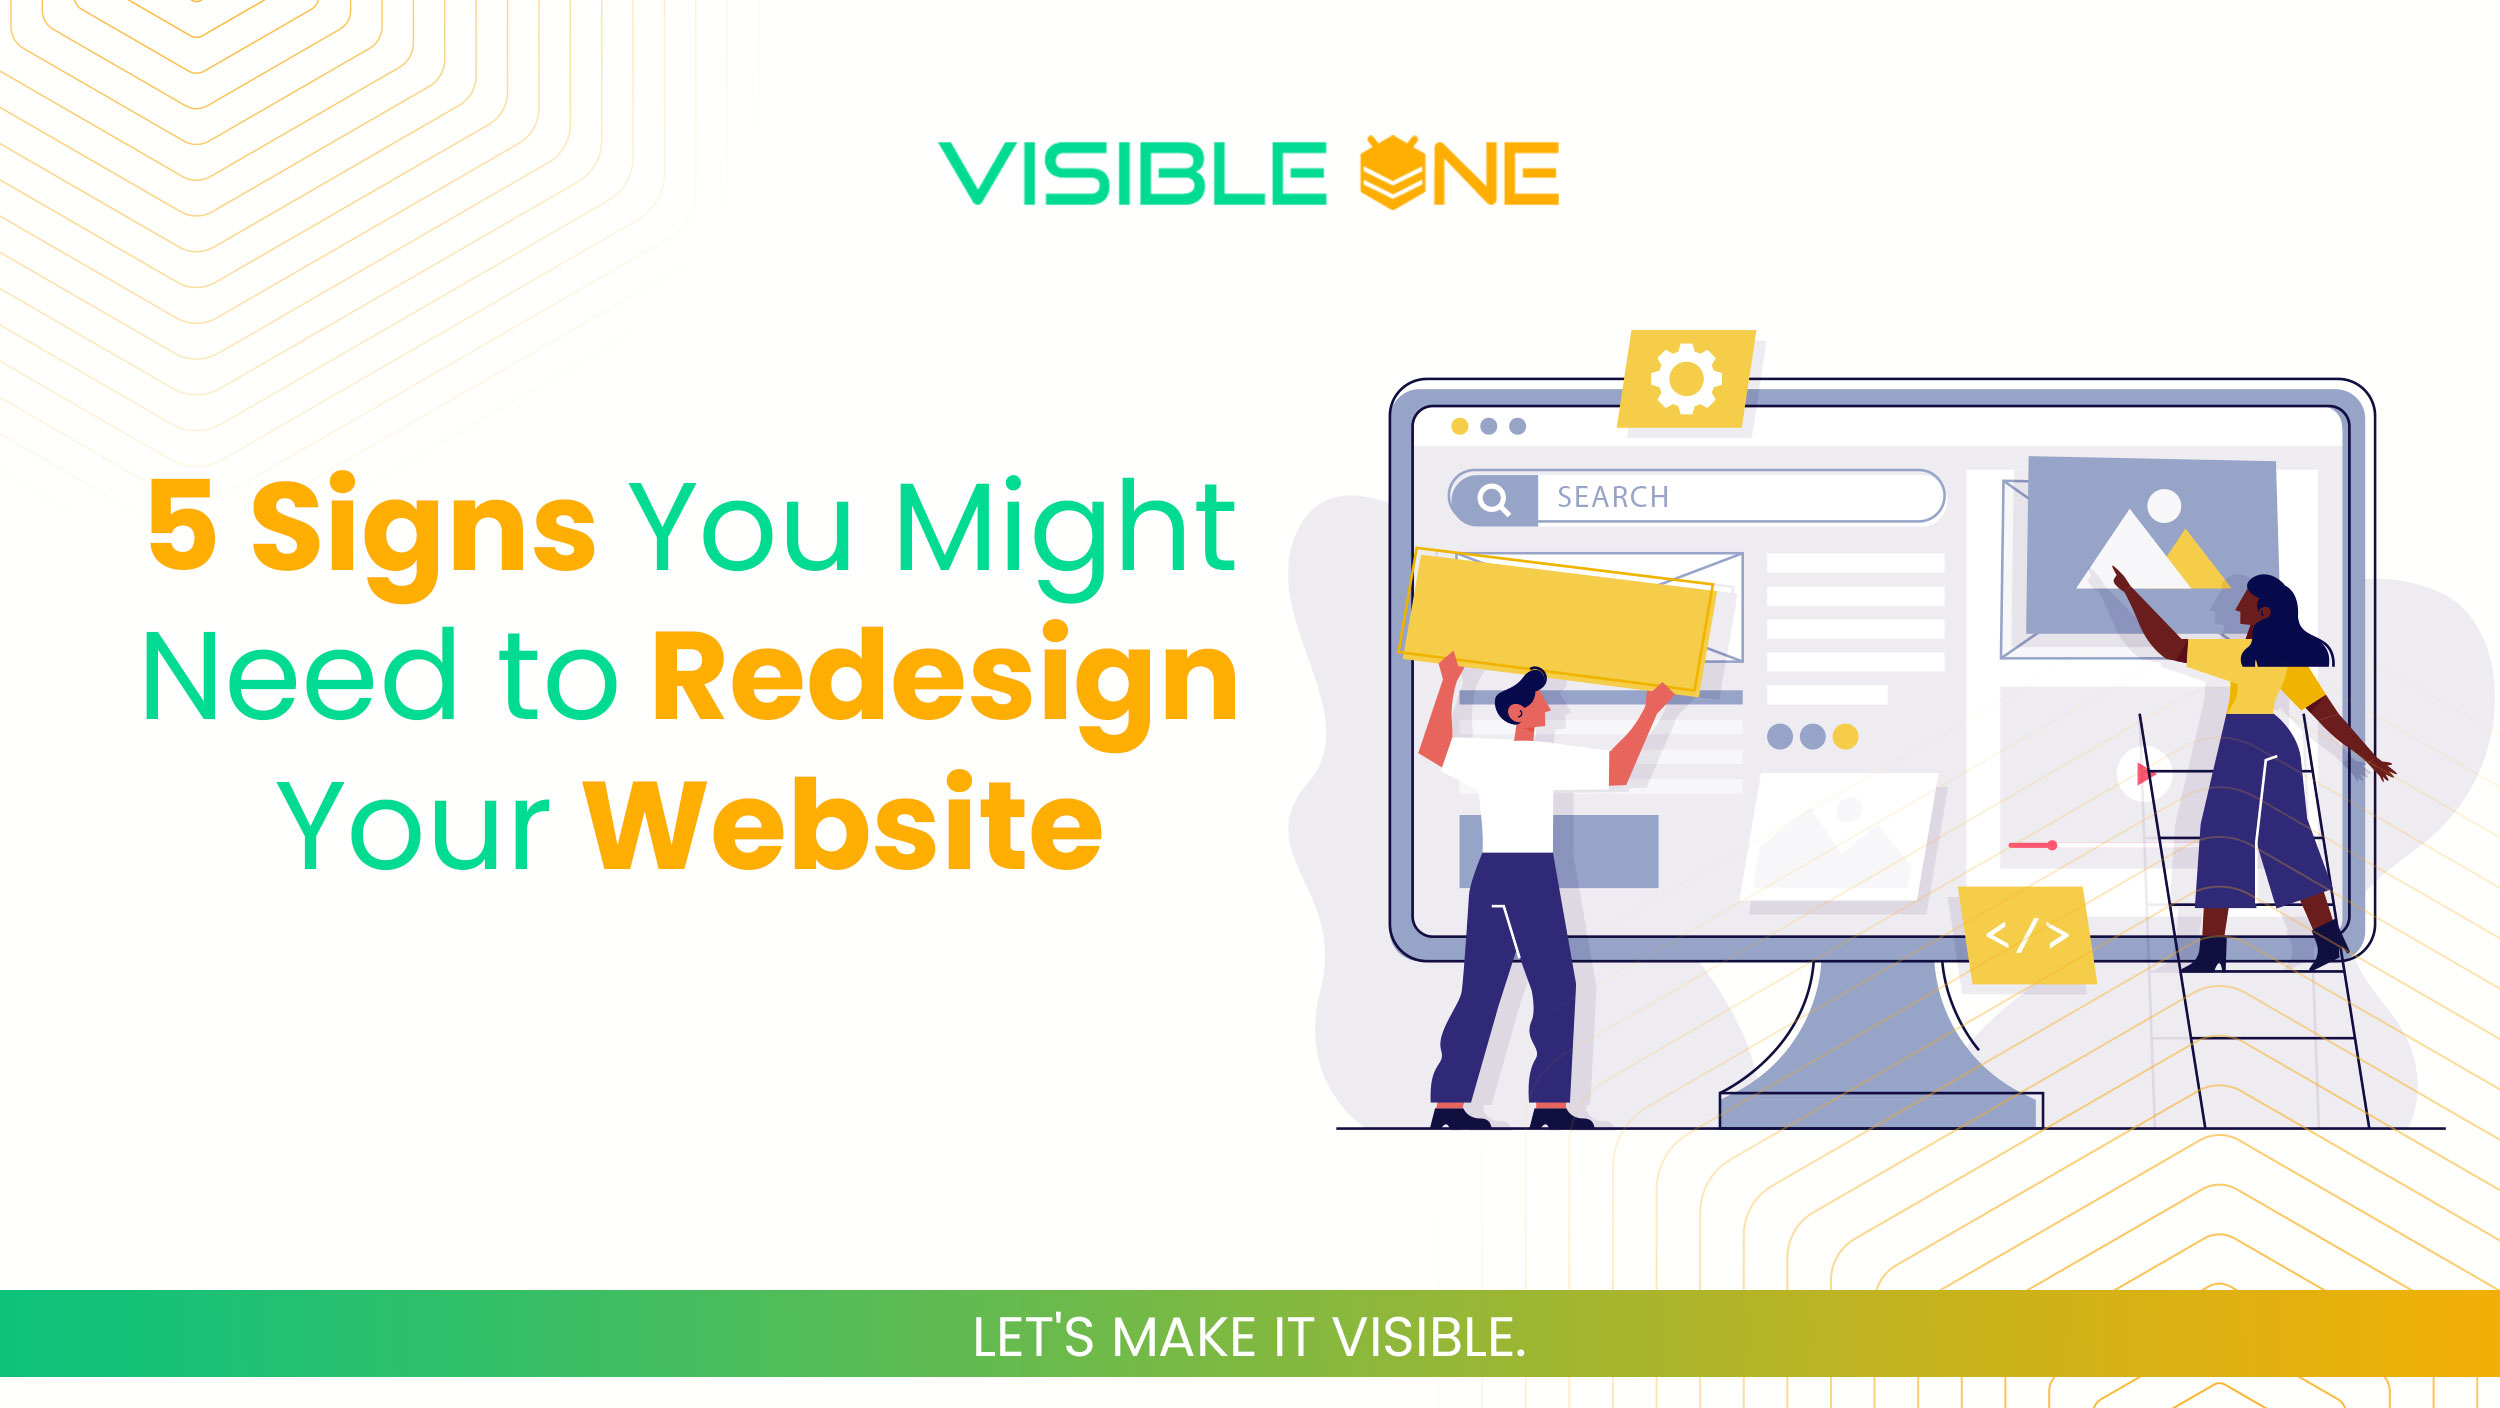 5 Signs You Might Need to Redesign Your Website